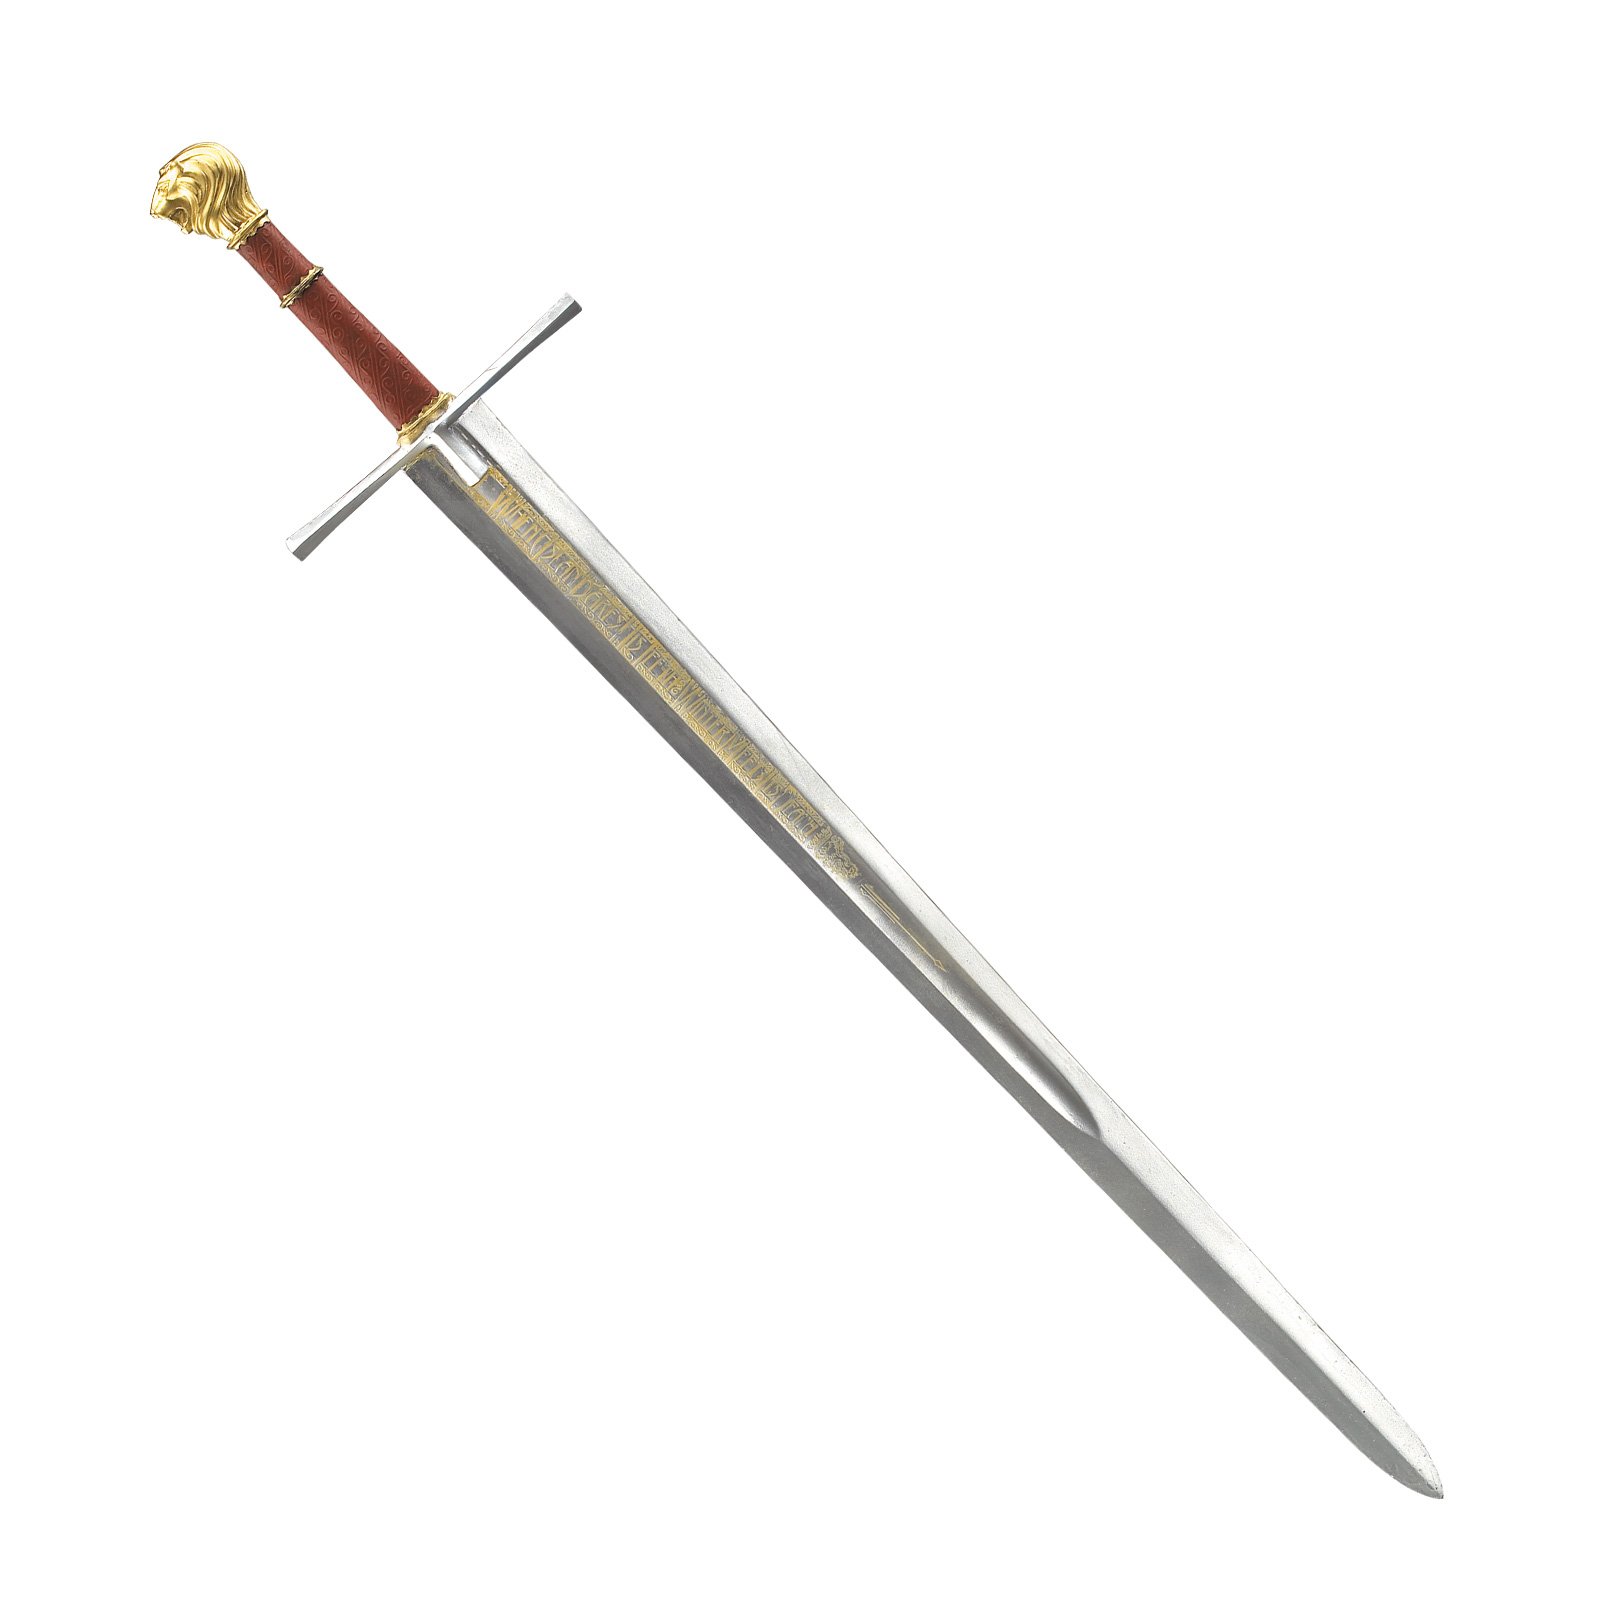 Sword - WikiNarnia - The Chronicles of Narnia, C.S. Lewis